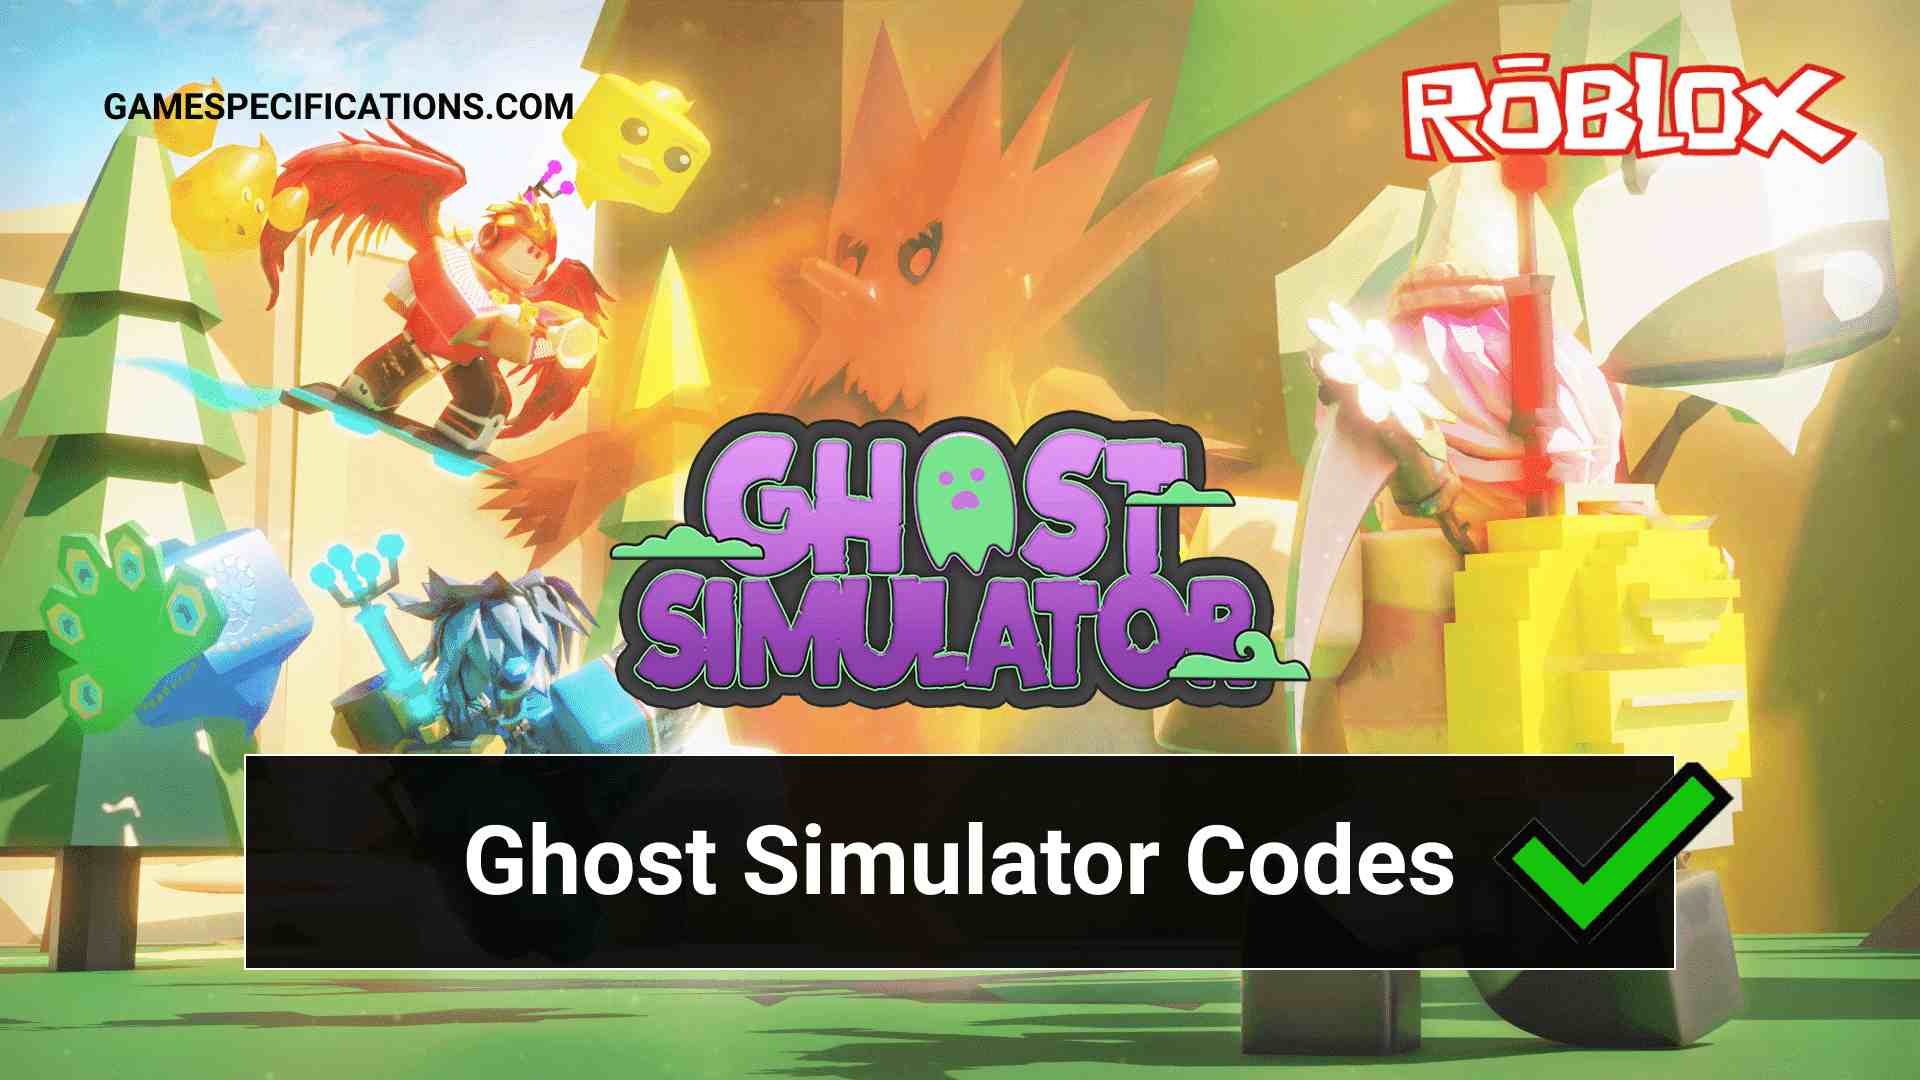 55 Roblox Ghost Simulator Codes To Get Free Rewards July 2021 Game Specifications - roblox vacuum code